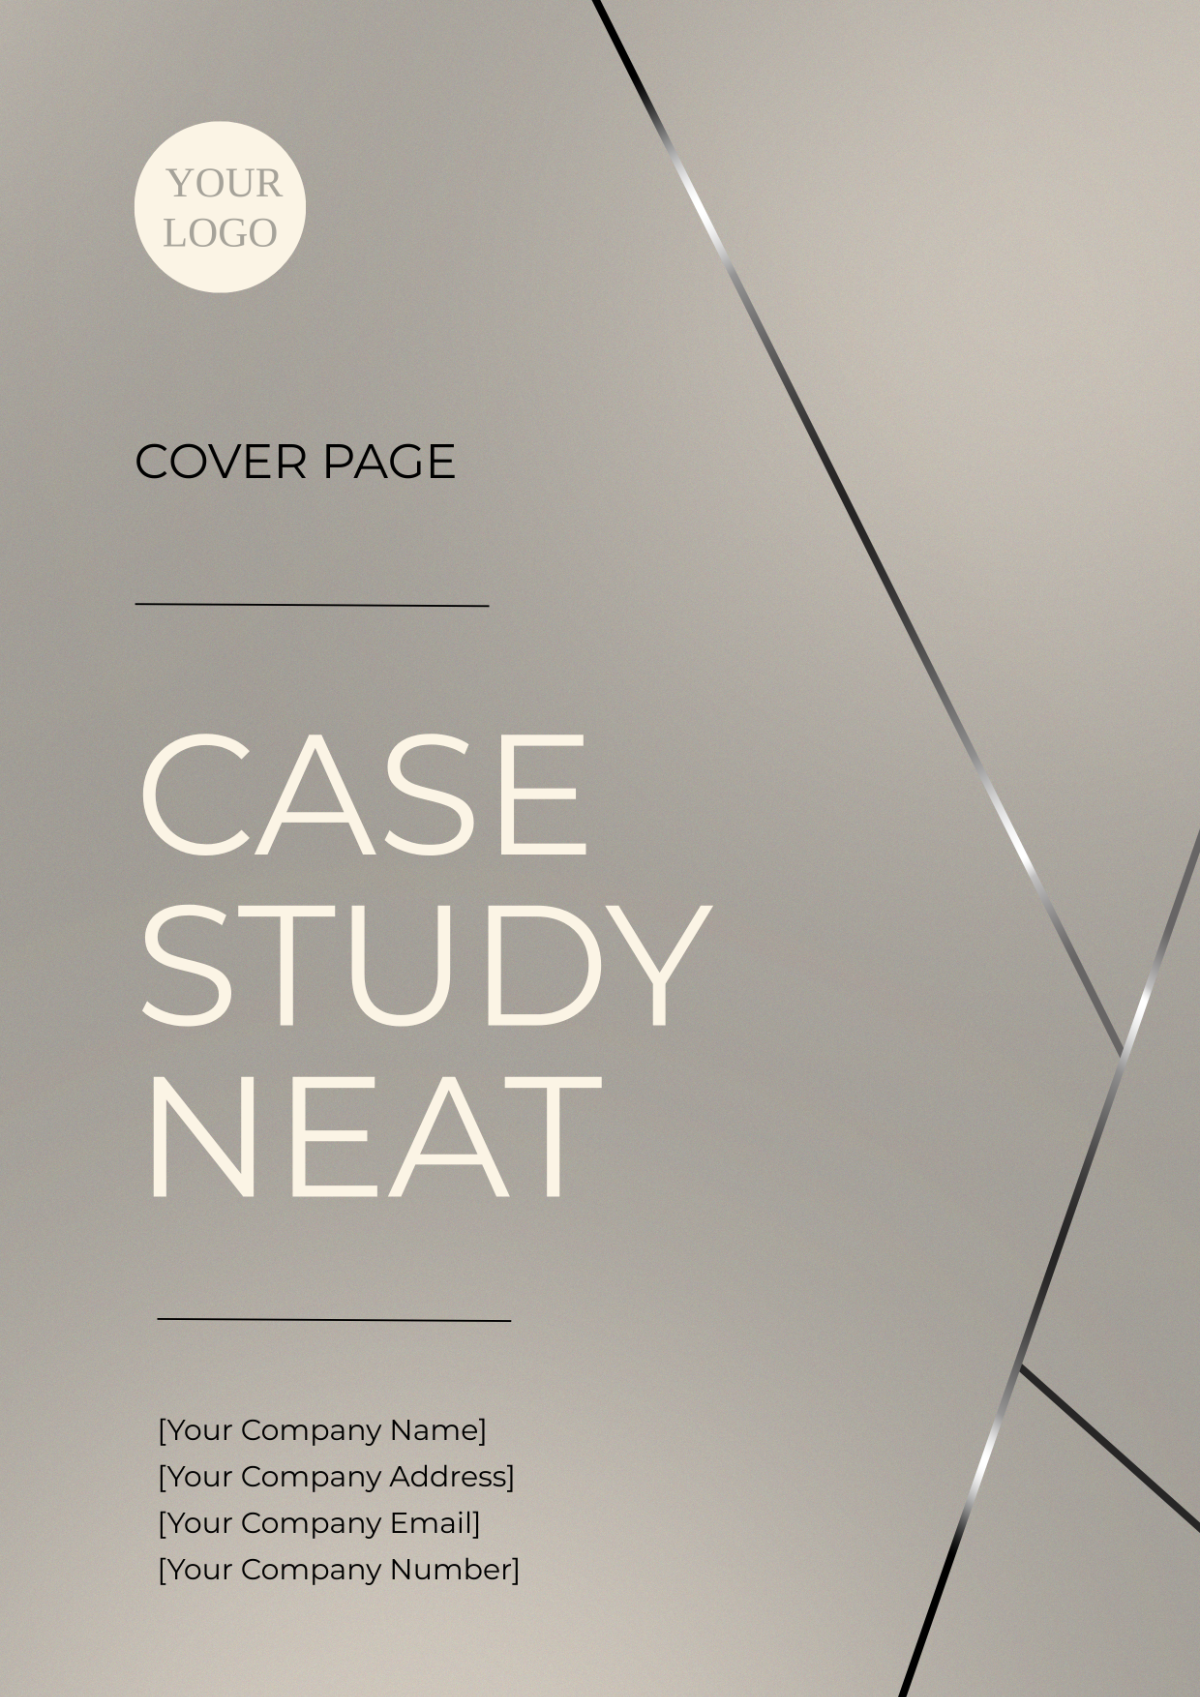 Case Study Neat Cover Page